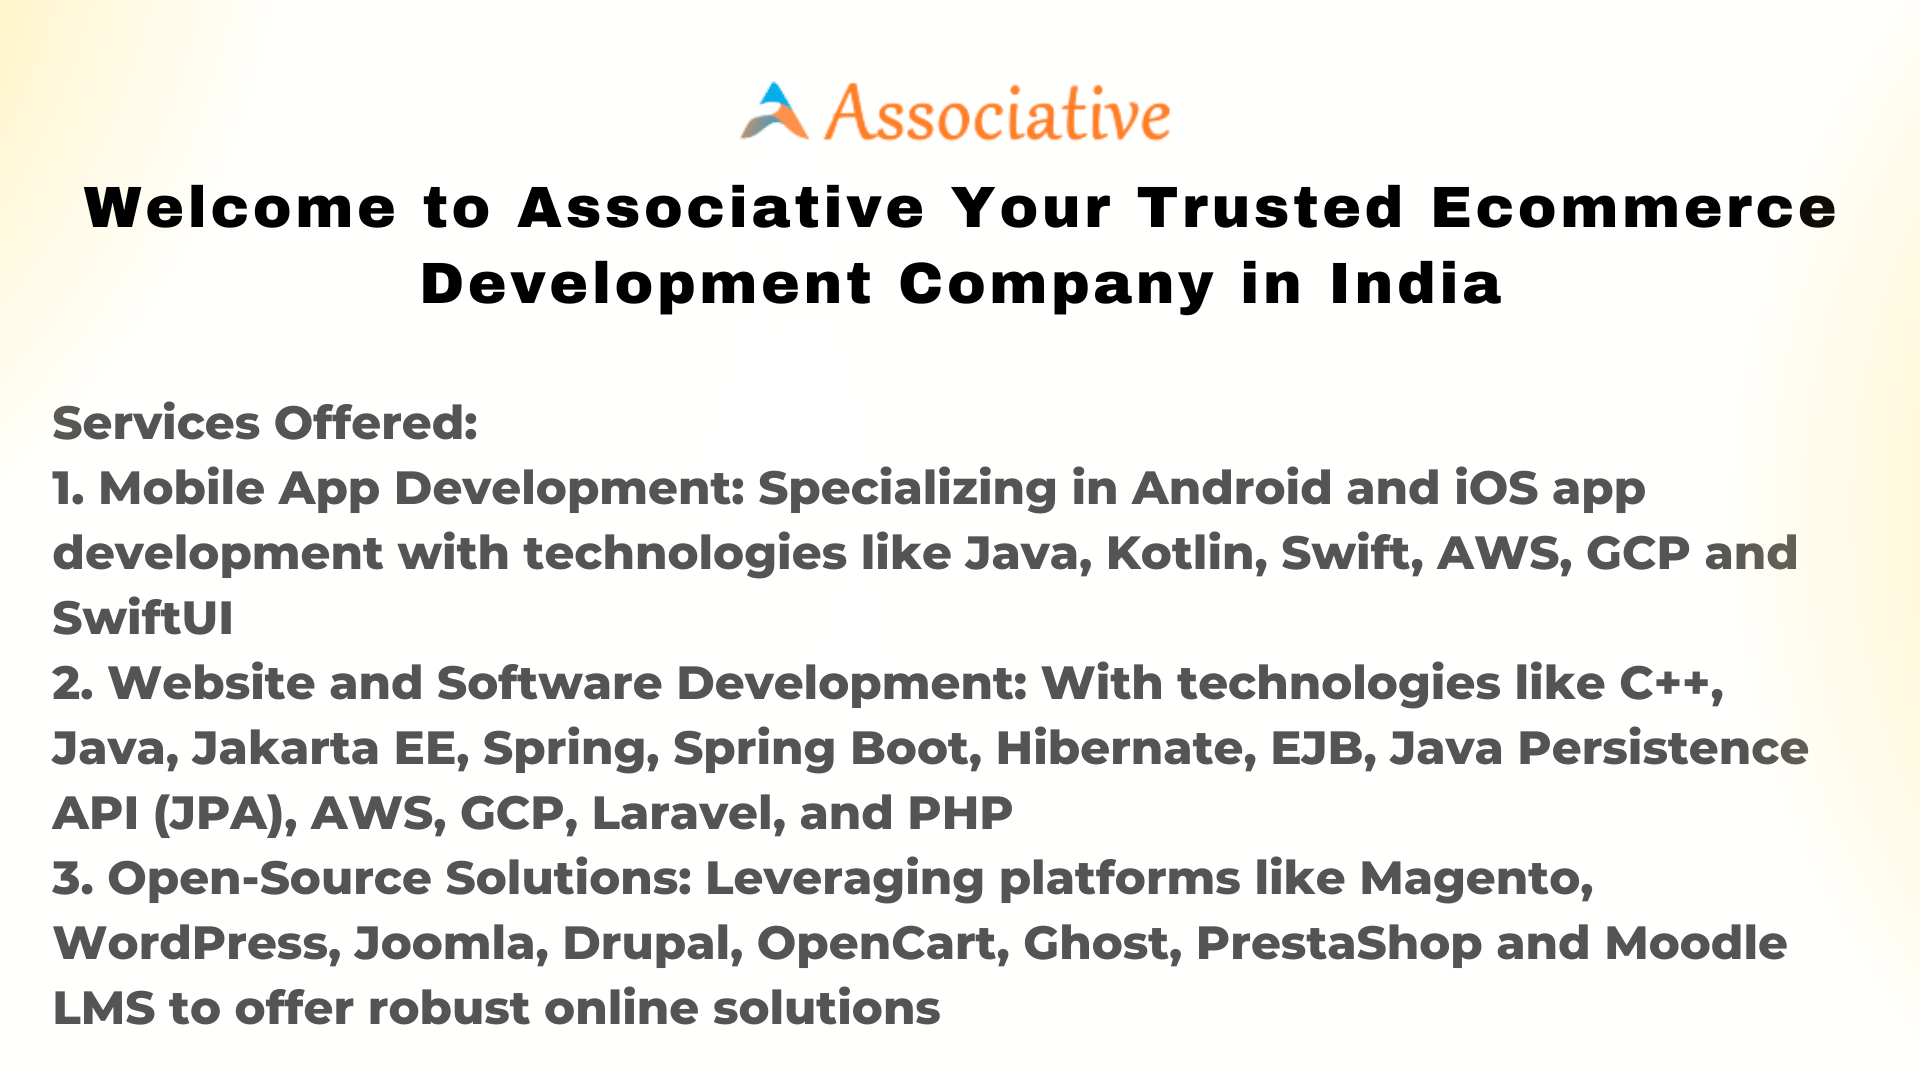 Welcome to Associative Your Trusted Ecommerce Development Company in India